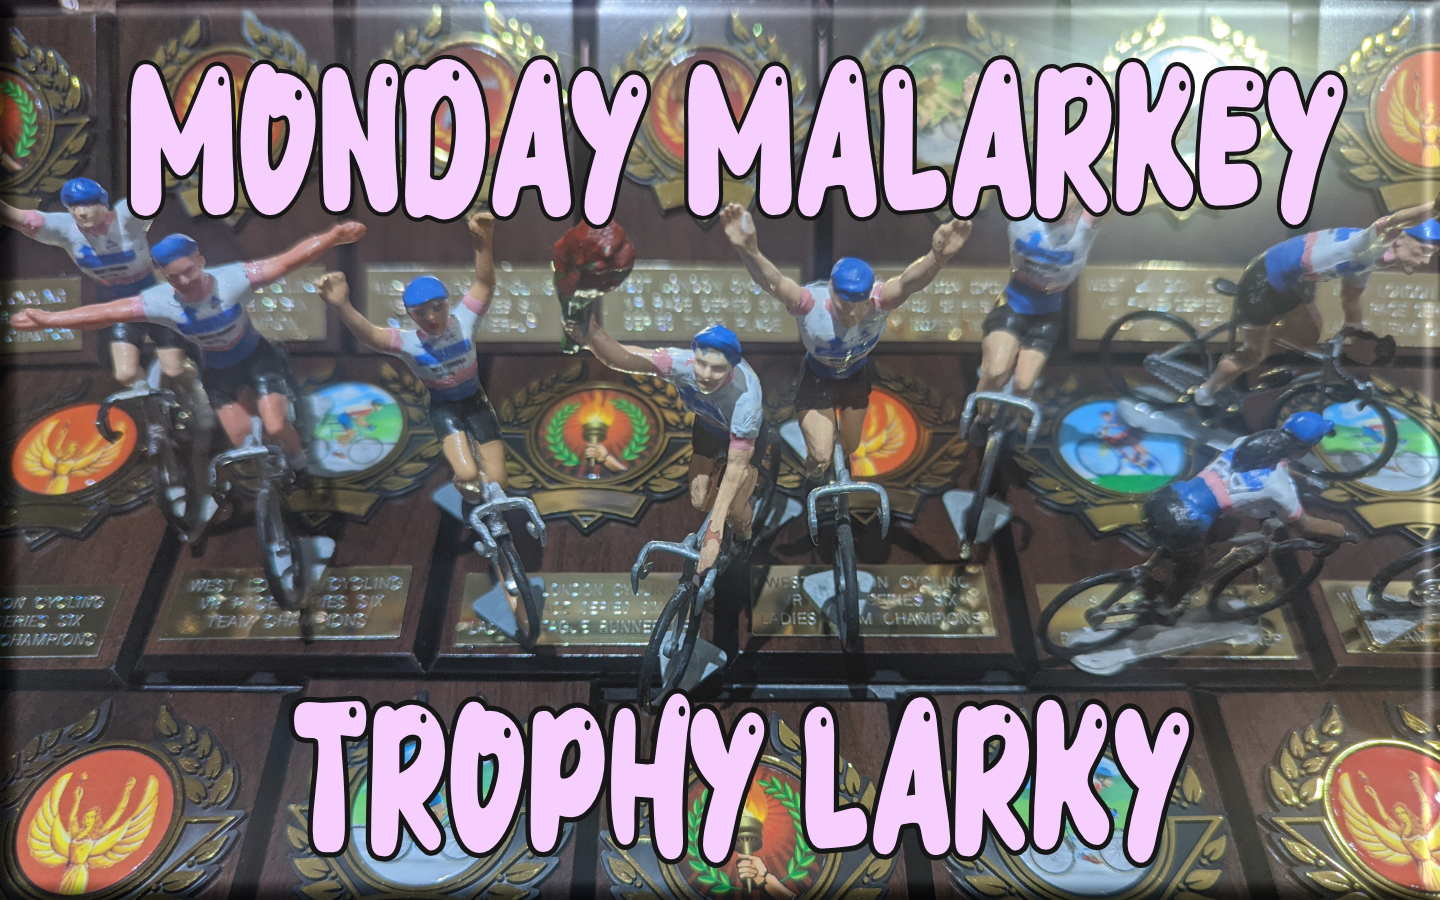 All Trophies from Monday Malarkey Series One and West London VR Series 7 have been mailed out to the winners